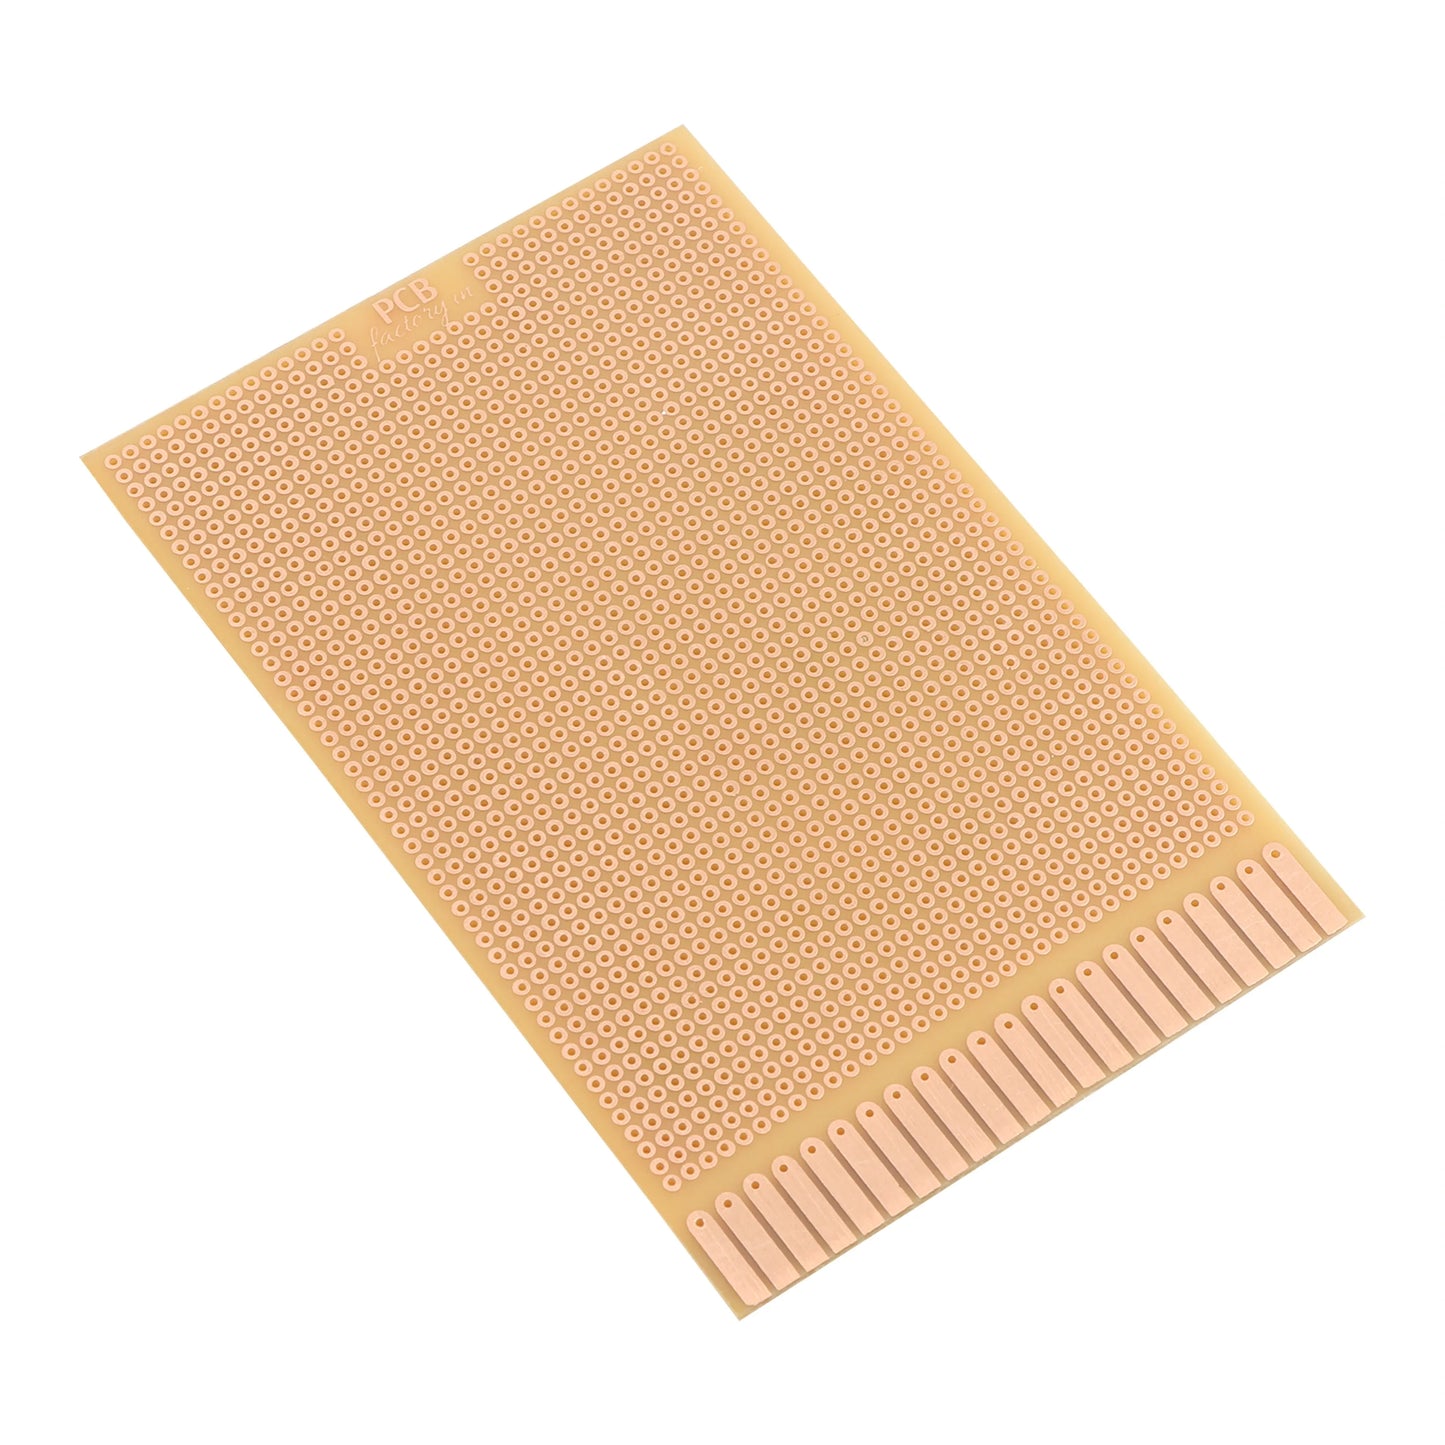 General Purpose PCB Breadboard – FR2 (Set of 20) (140mmx90mm) – with holes